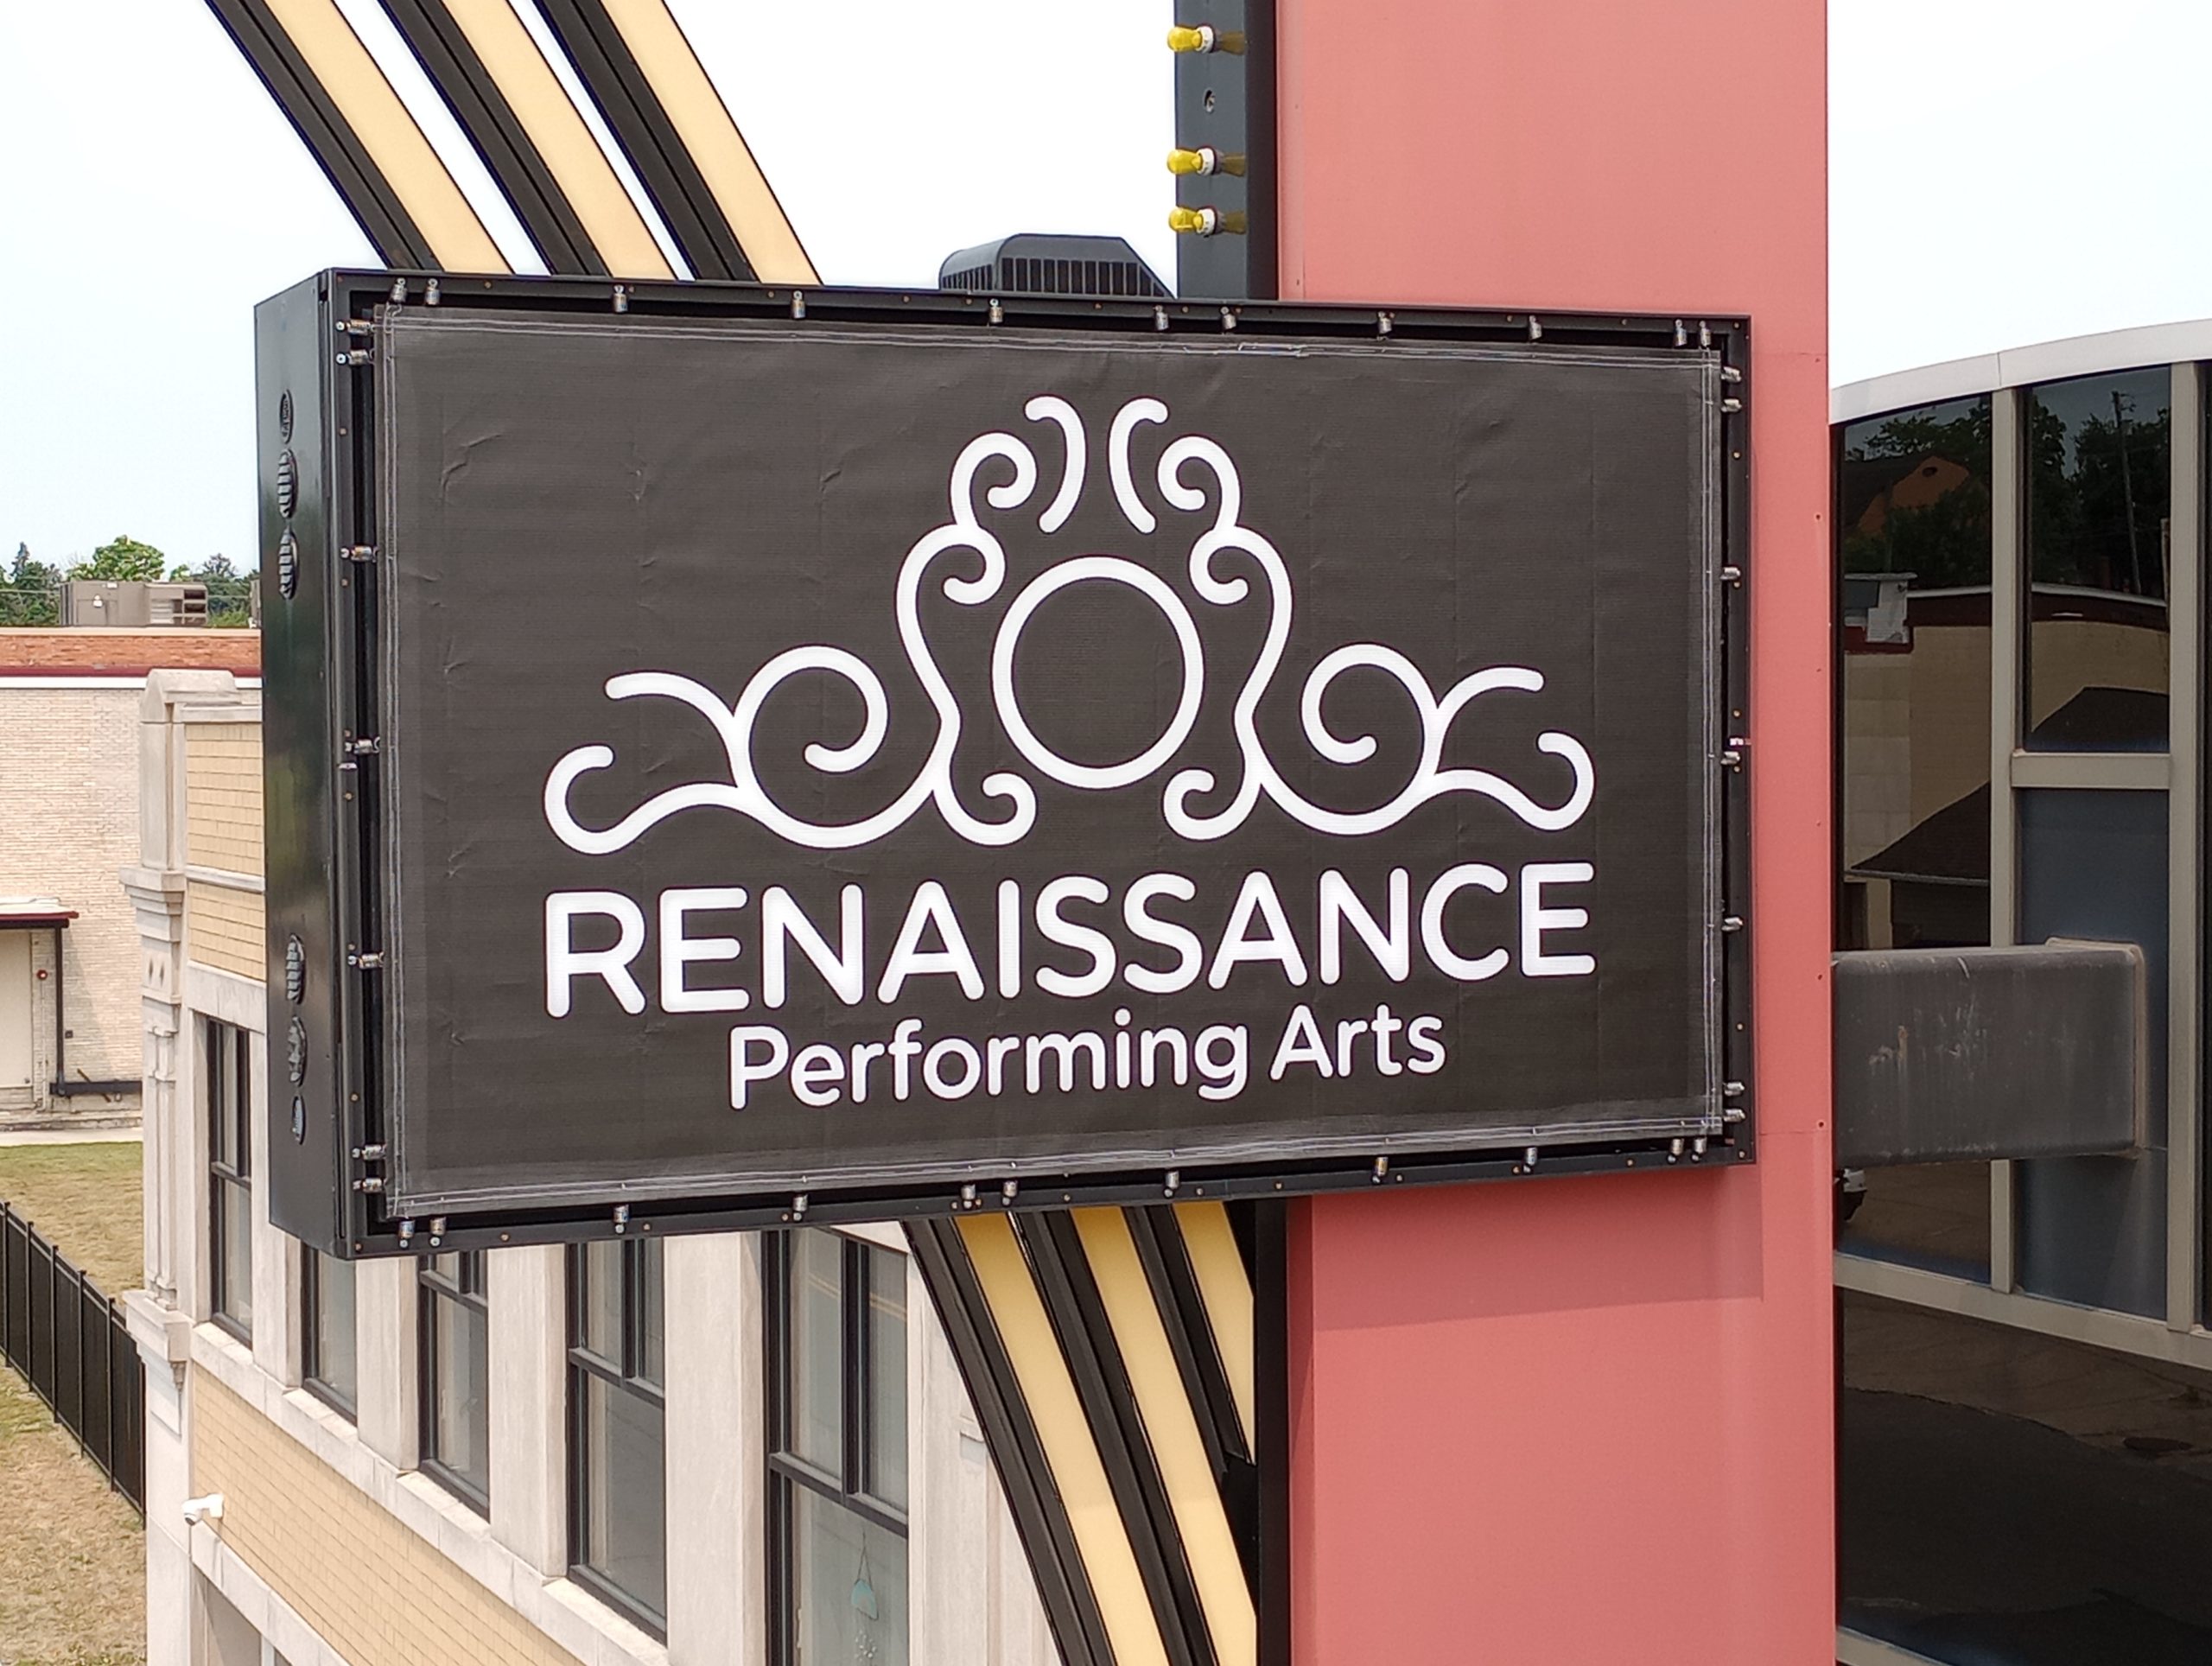 Renaissance-Theatre-Broken-Digital-Problem-Solved-BannerFrame-CLASSIC-looks-like-a-trampoline-scaled When A Digital Sign Goes Bad, It's Time to Go Old School